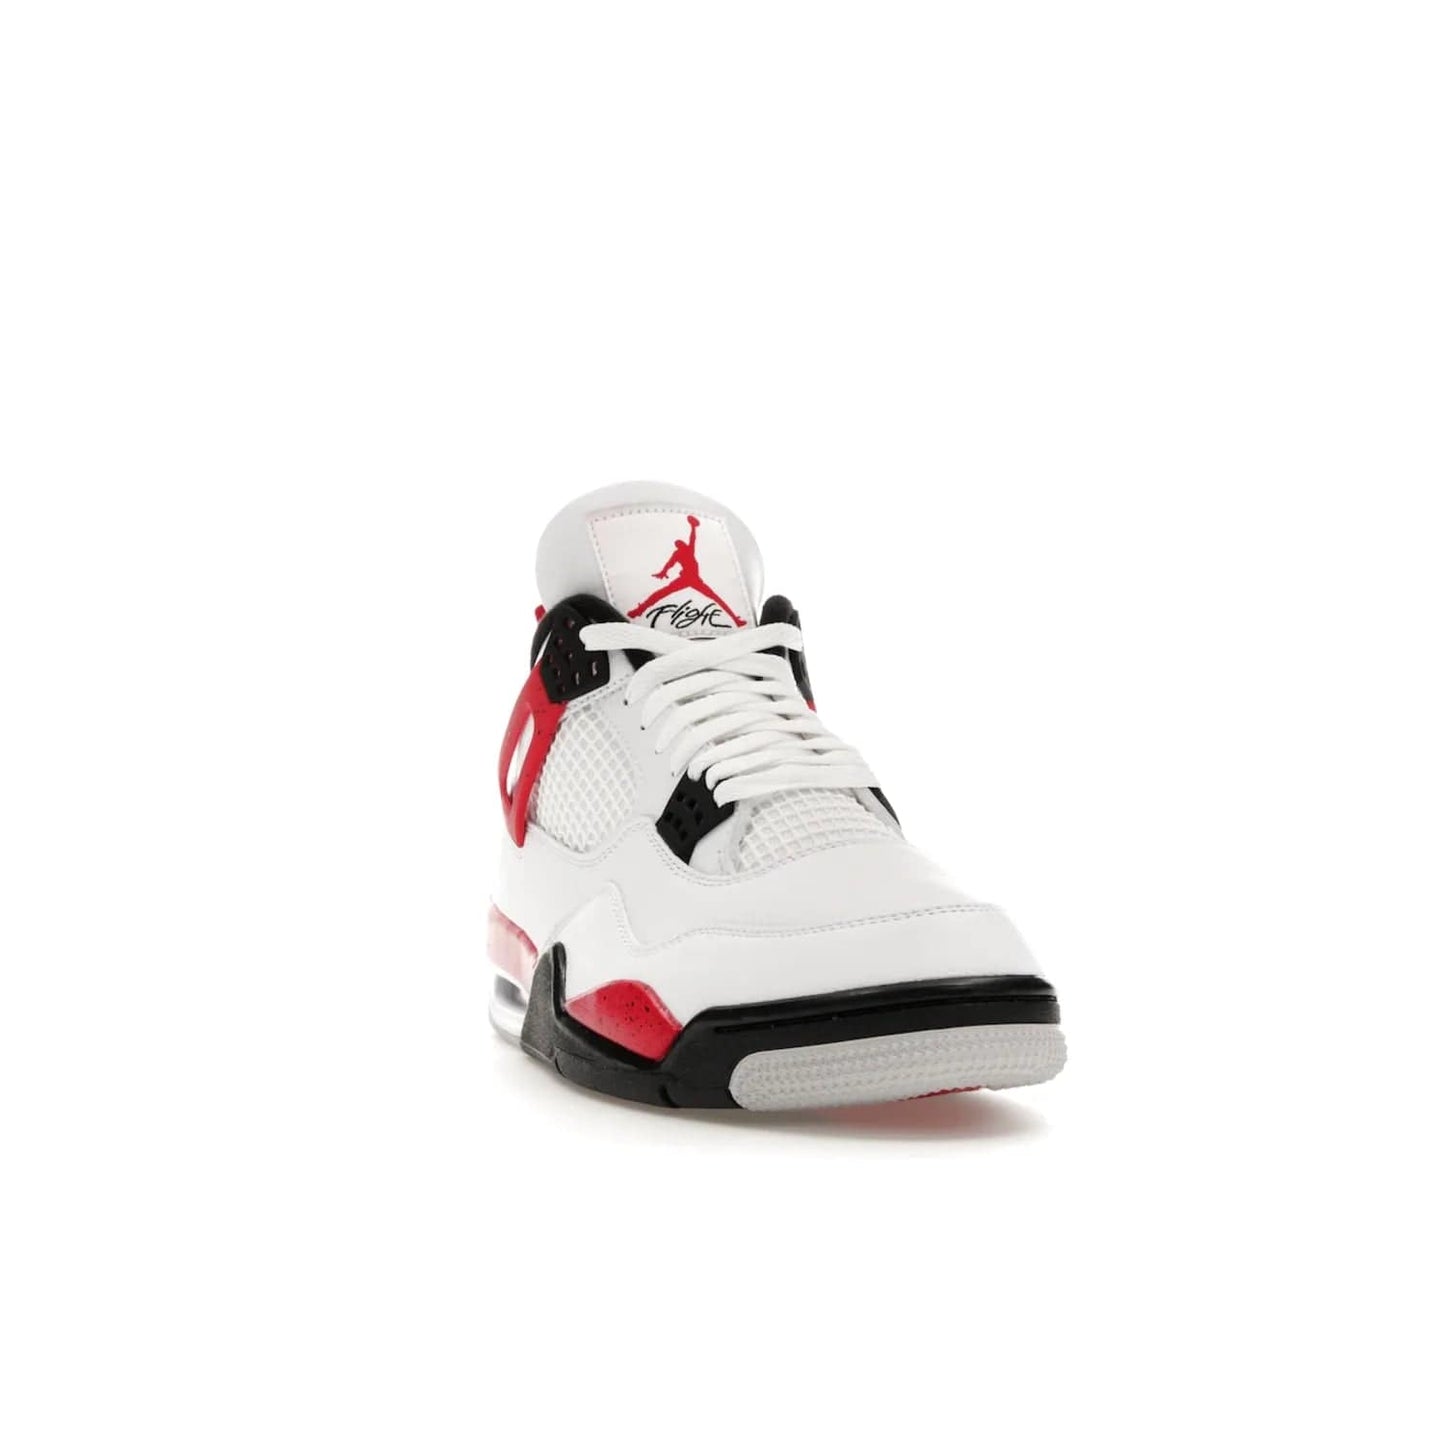 Jordan 4 Retro Red Cement - Image 8 - Only at www.BallersClubKickz.com - Iconic Jordan silhouette with a unique twist. White premium leather uppers with fire red and black detailing. Black, white, and fire red midsole with mesh detailing and Jumpman logo. Jordan 4 Retro Red Cement released with premium price.